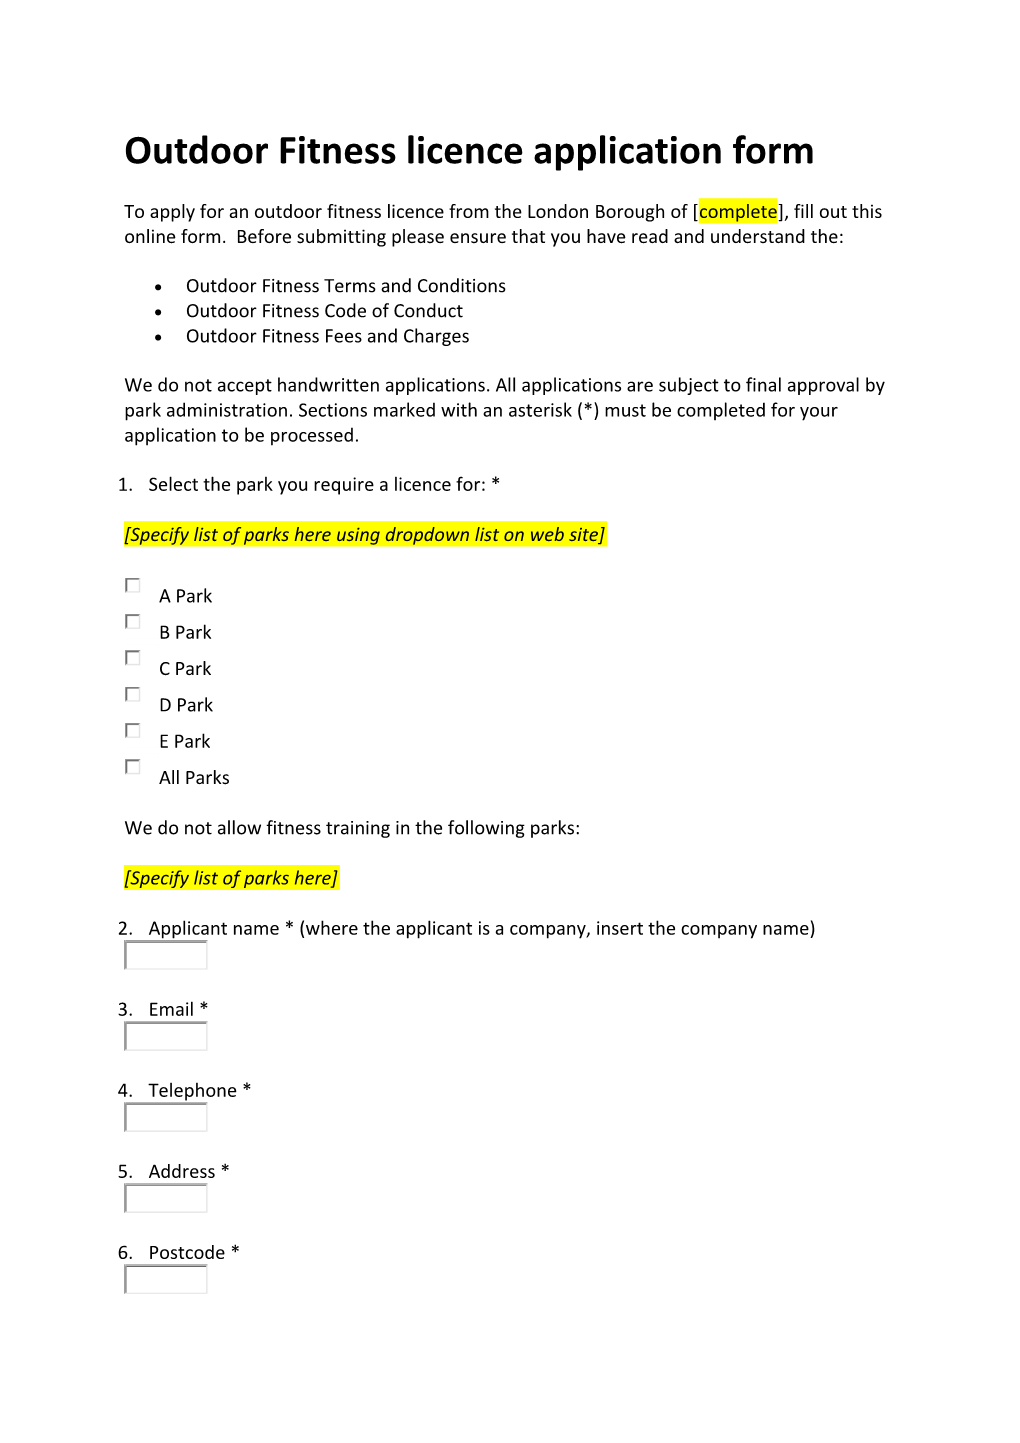 Outdoor Fitness Licence Application Form TL1